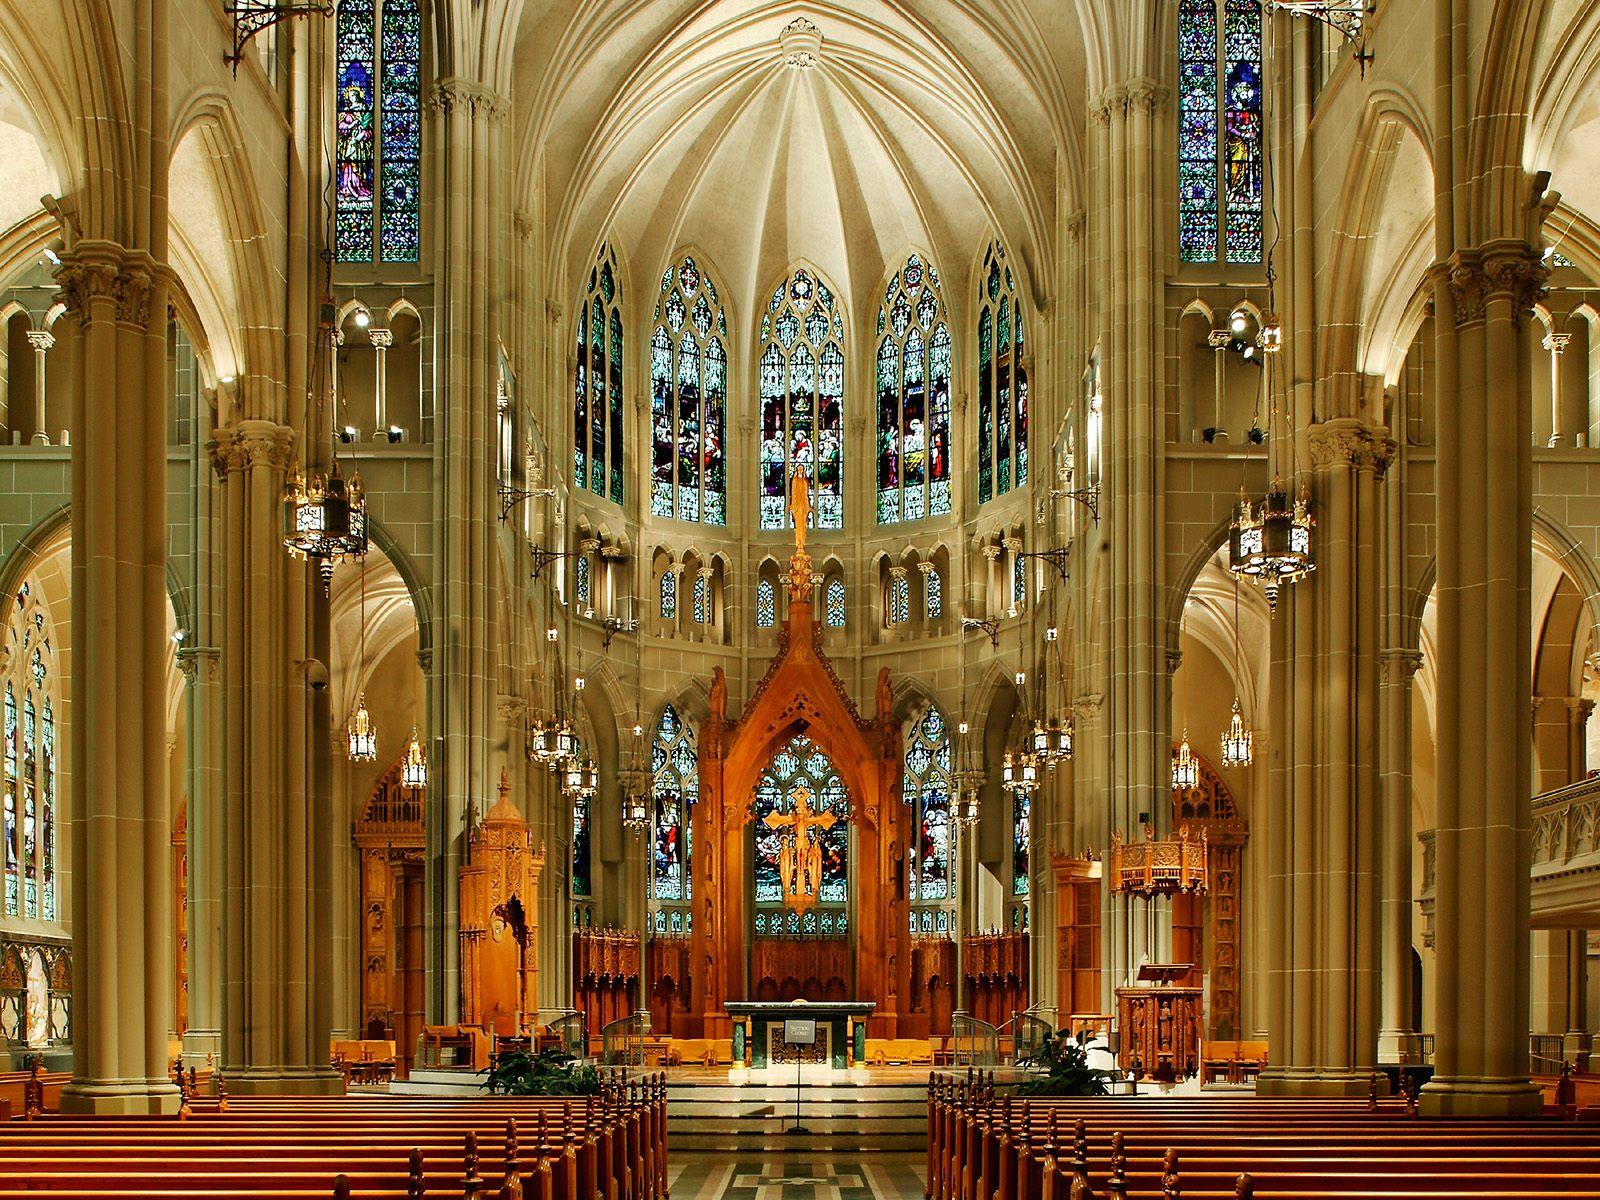 [St.+Mary's,+Cathedral+Basilica+of+the+Assumption,+Covington,+Kentucky.jpg]